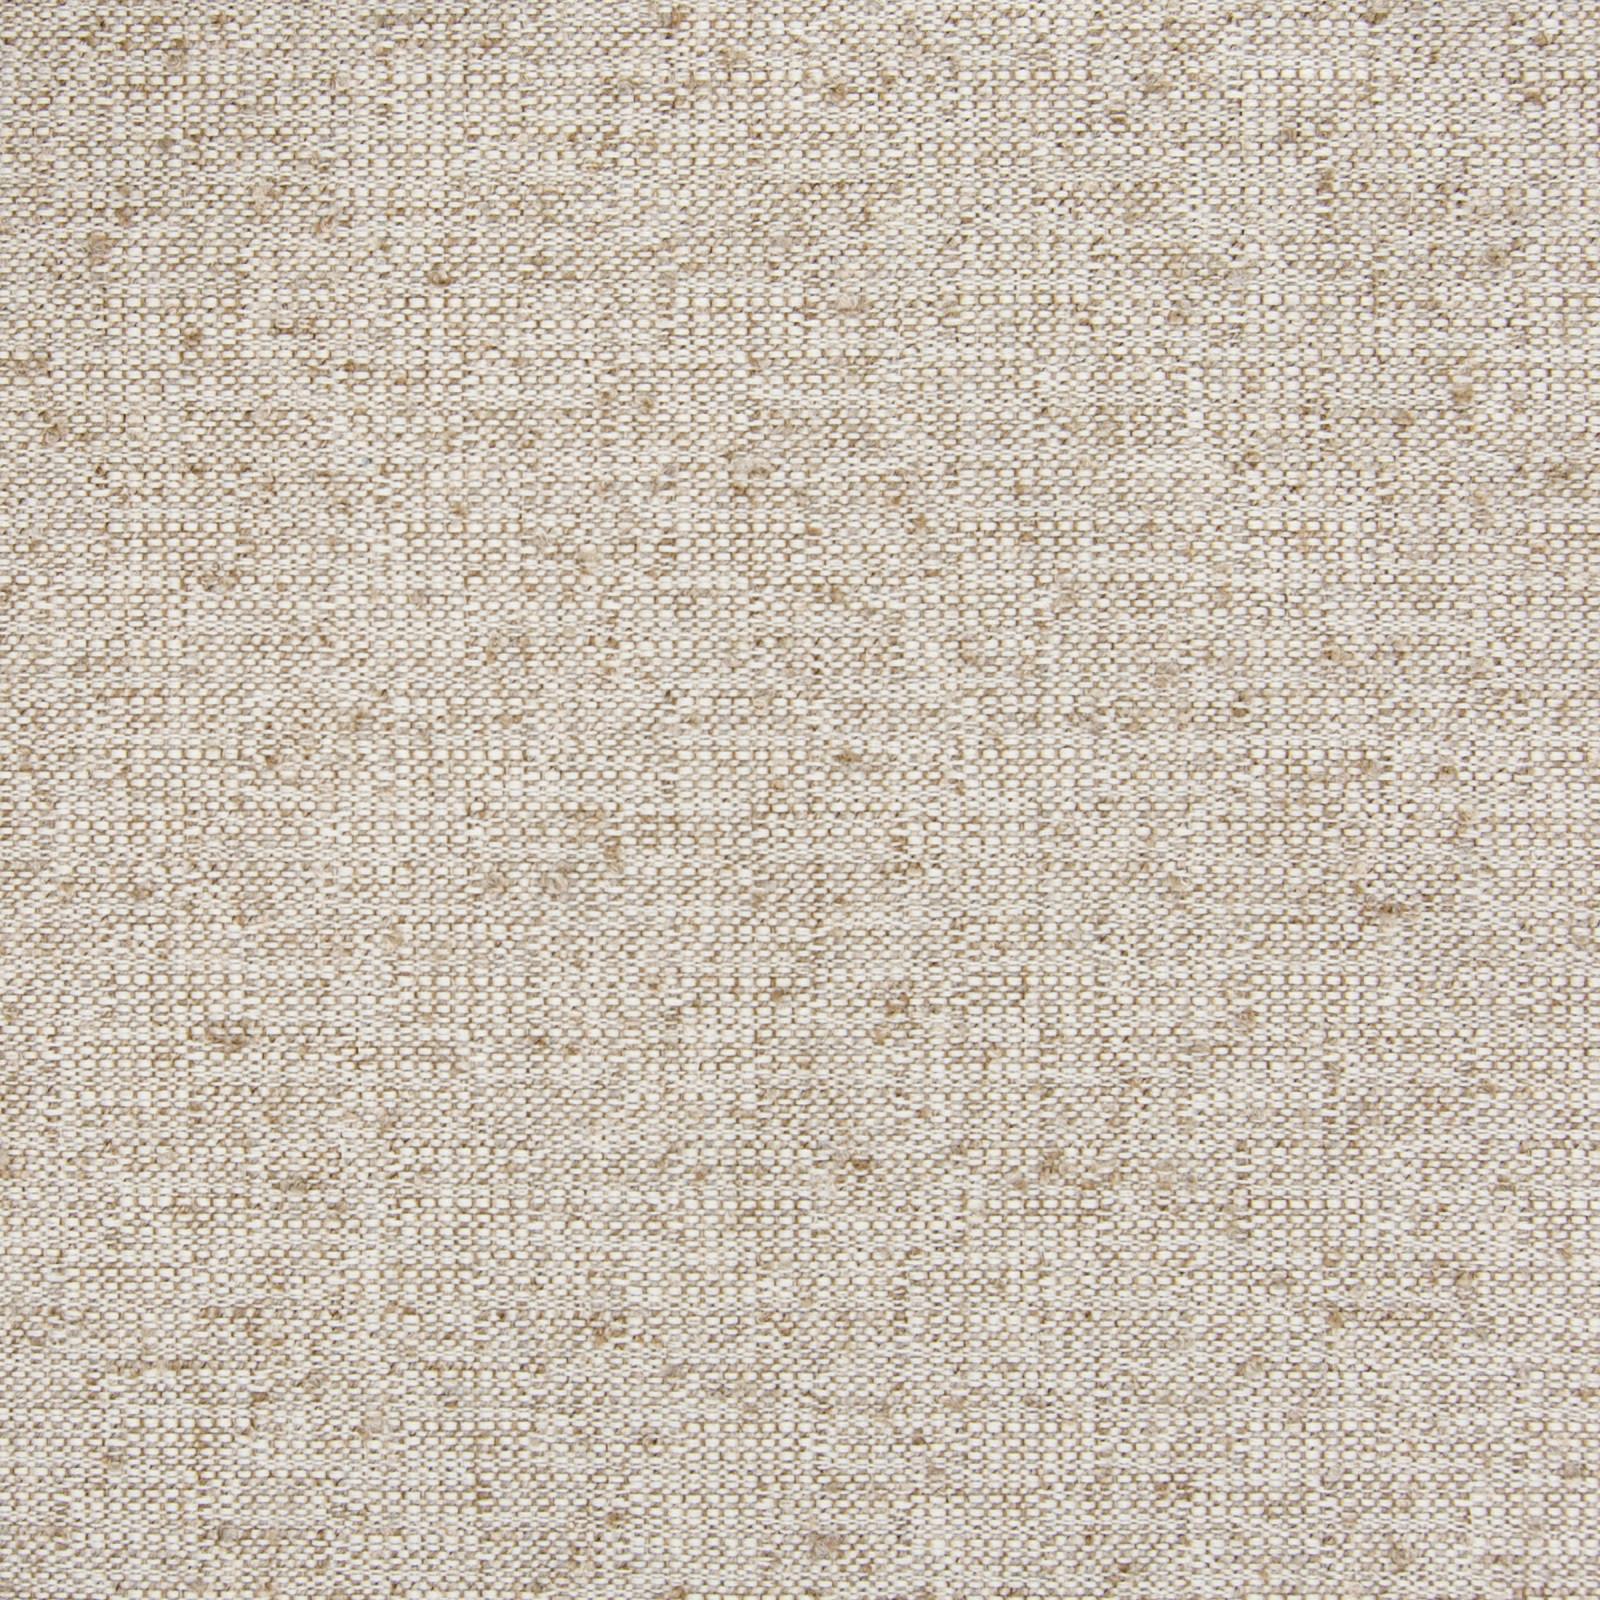 Hemp Fabric from DutchCrafters Amish Furniture